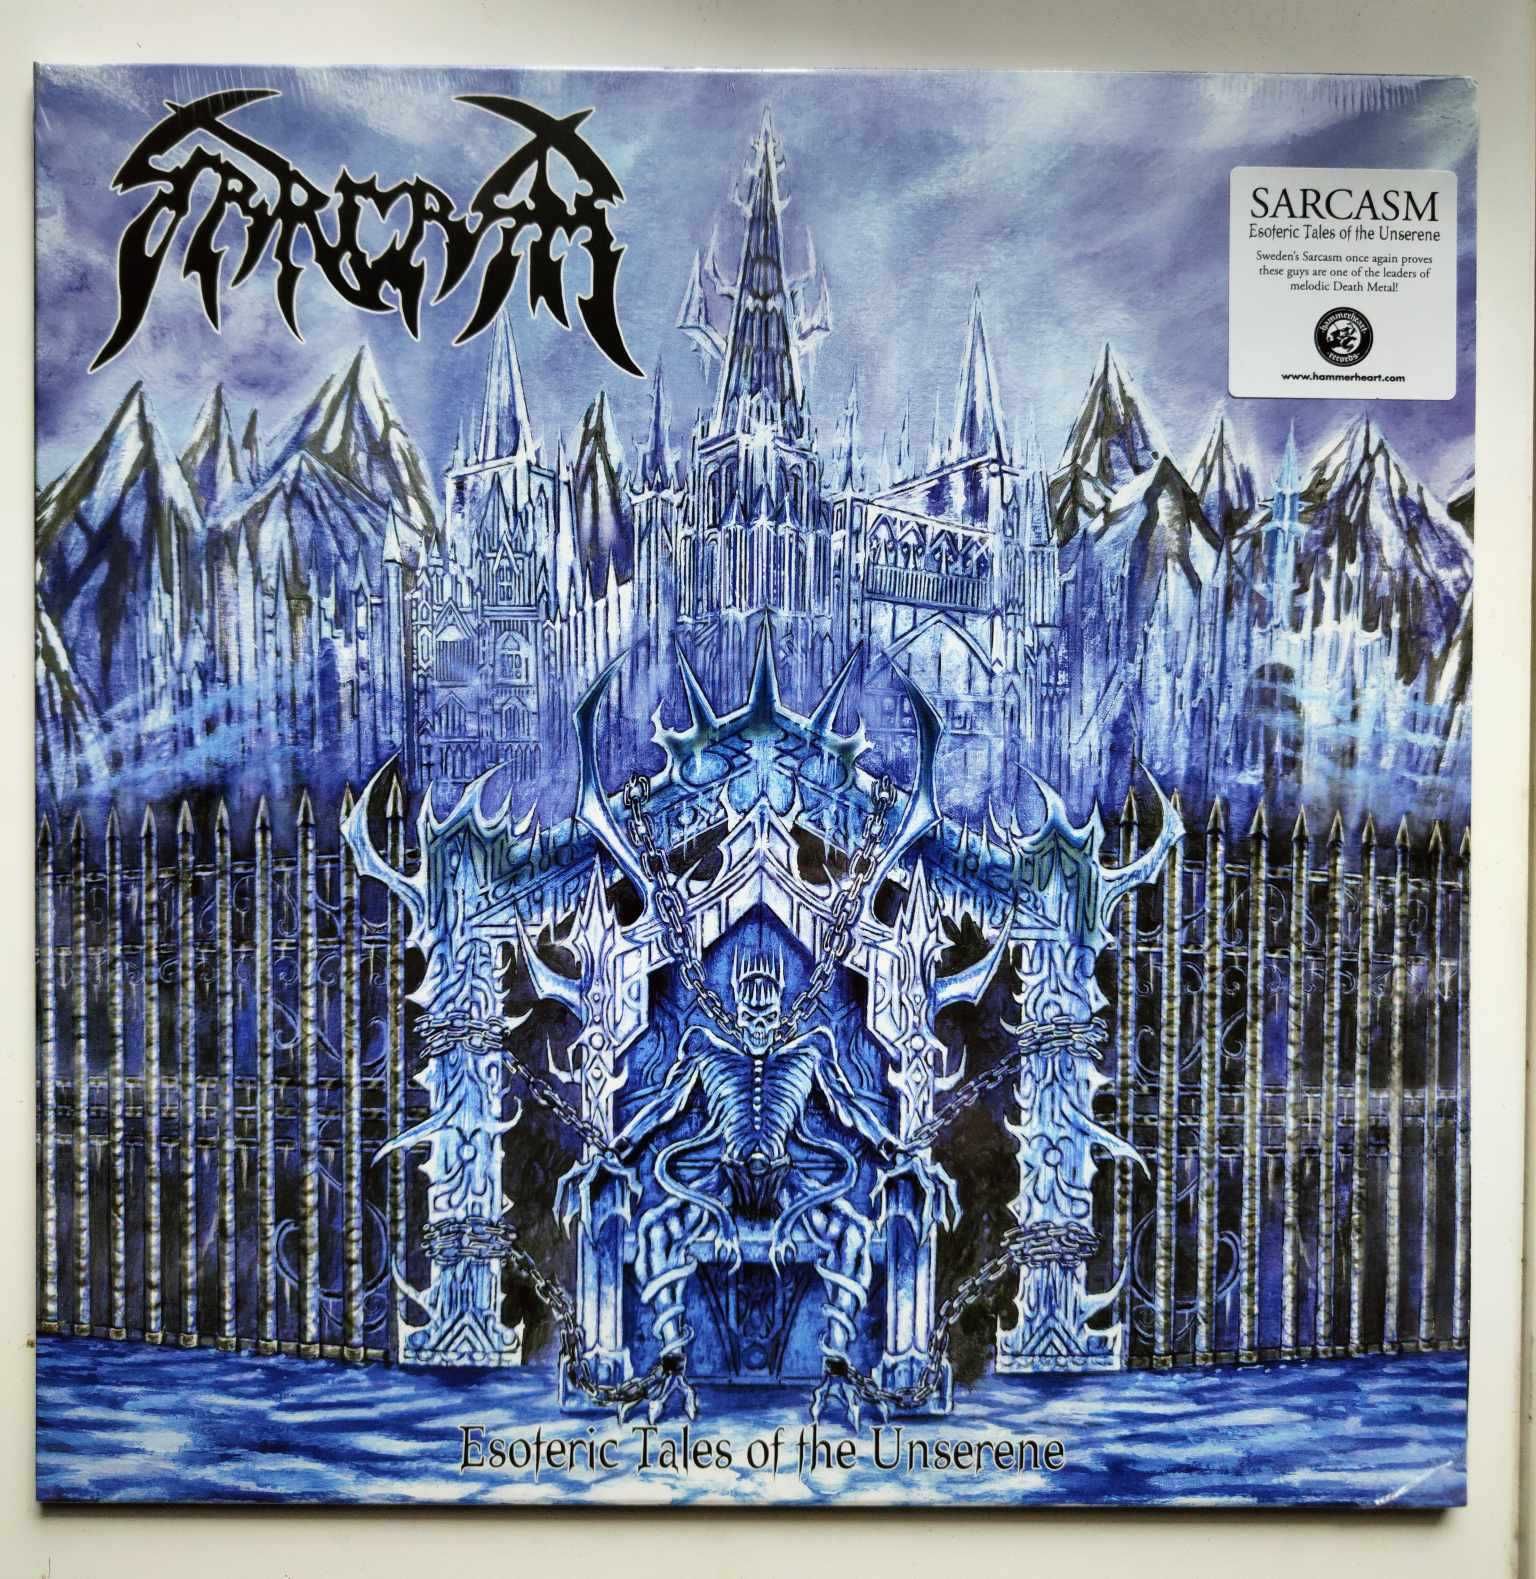 SARCASM - Esoteric Tales Of The Unserene - Black LP